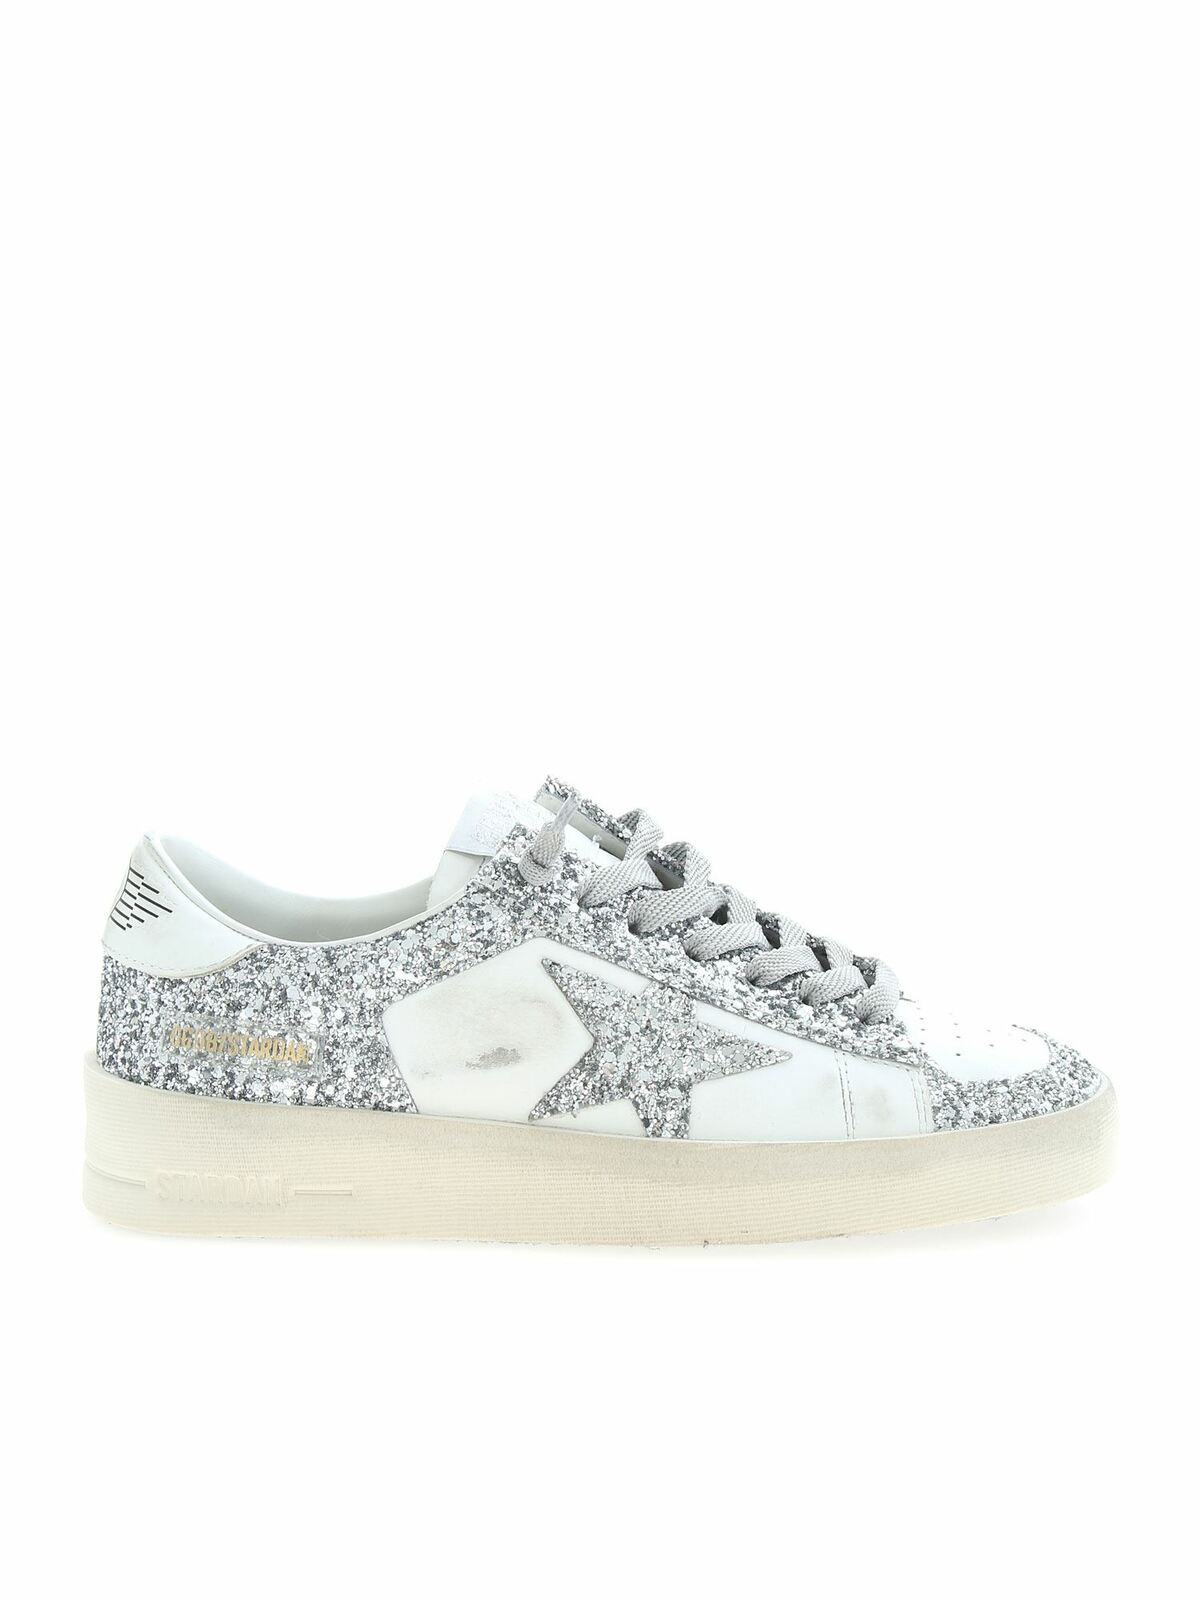 Trainers Golden Goose - Stardan sneakers in white and silver glitter ...